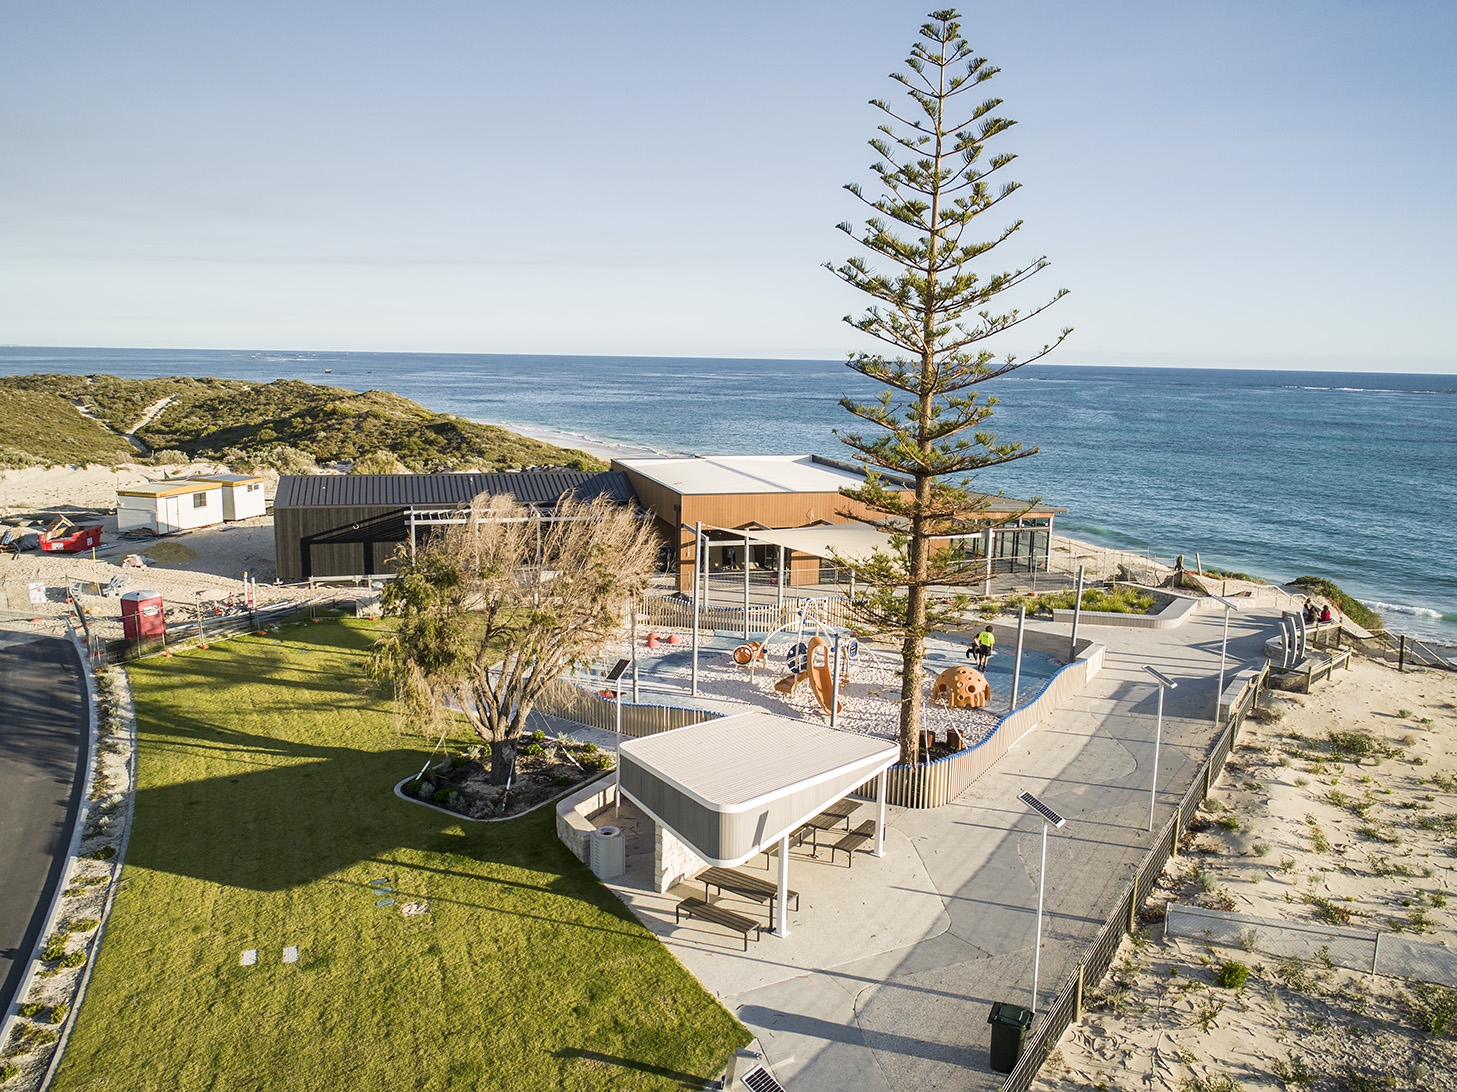 The Amberton Beach Bar & Kitchen is an iconic venue perched 16m above the sea within the Amberton Beach $5m Foreshore Precinct.